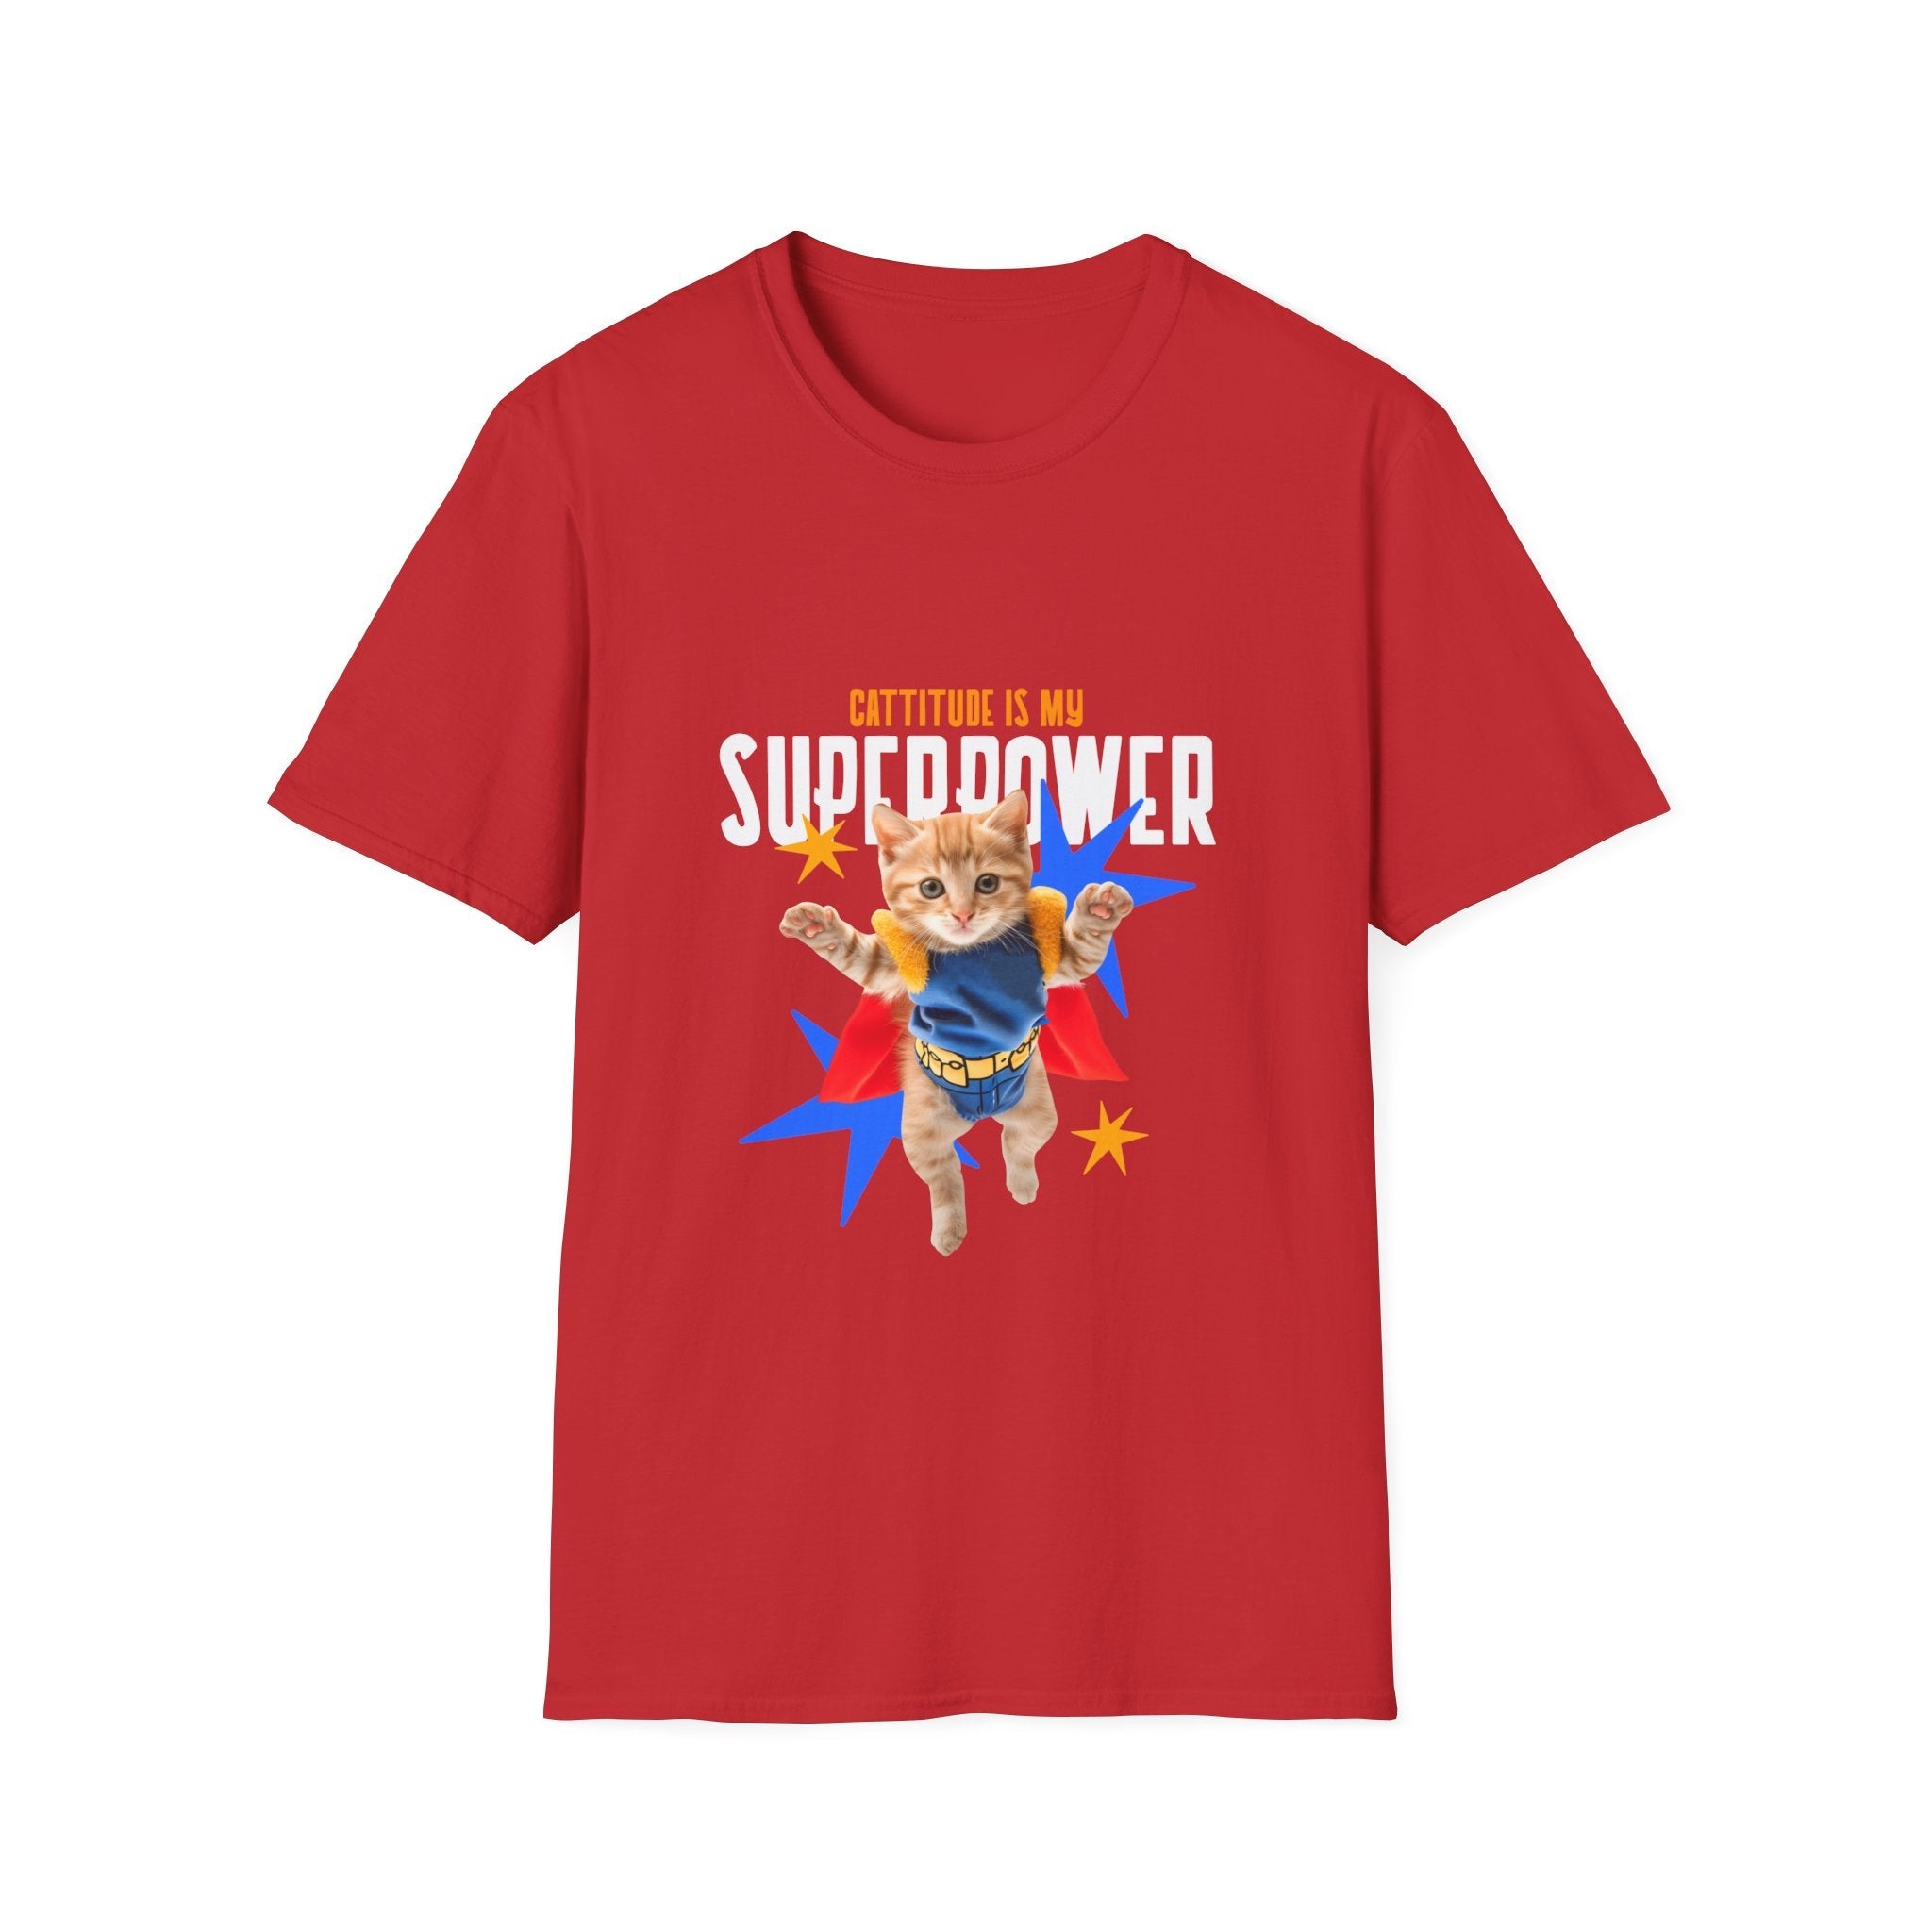 Cattitude is My Superpower T-Shirt